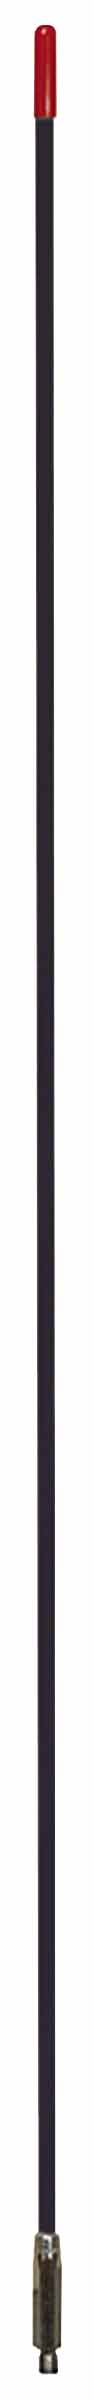 RUSTY ROOSTER 4.5 FOOT CB ANTENNA (BLACK)